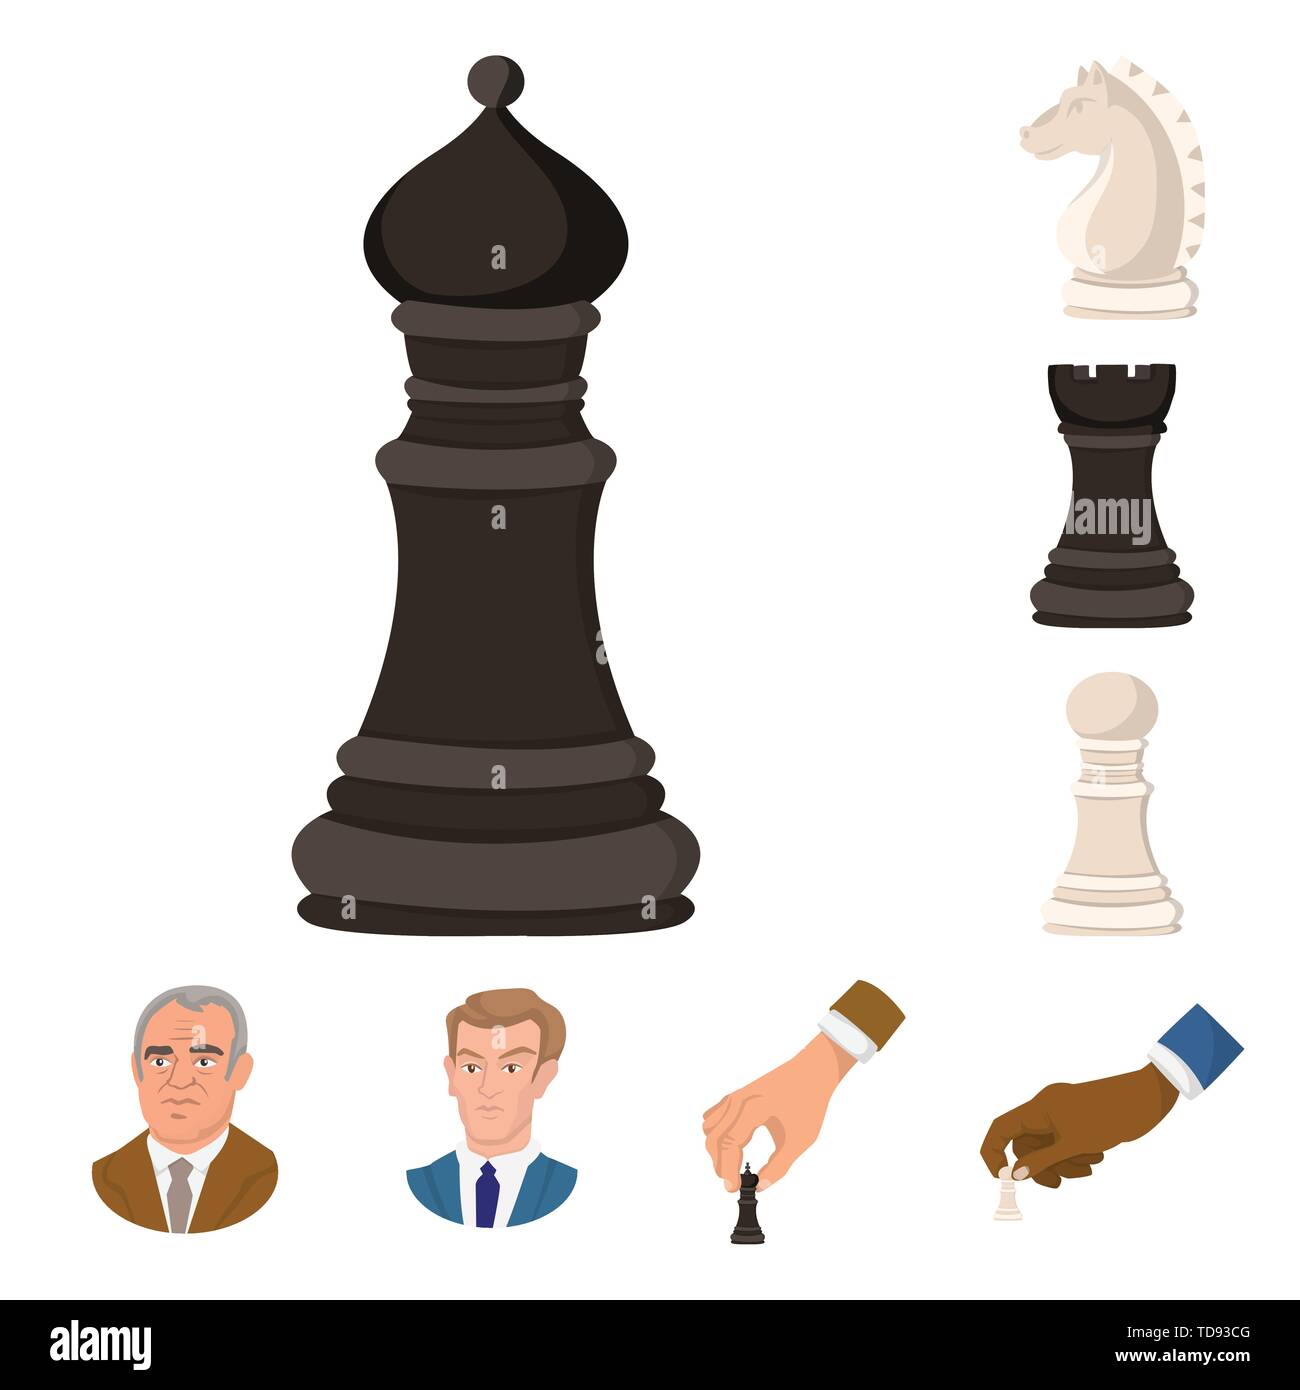 bishop,knight,rook,pawn,man,hand,strategic,horse,black,board,face,businessman,king,championship,castle,white,person,profile,concept,tower,figure,hair,business,check,head,network,counter,portrait,chess,game,piece,strategy,tactical,play,checkmate,thin,club,target,set,vector,icon,illustration,isolated,collection,design,element,graphic,sign,cartoon,color Vector Vectors , Stock Vector